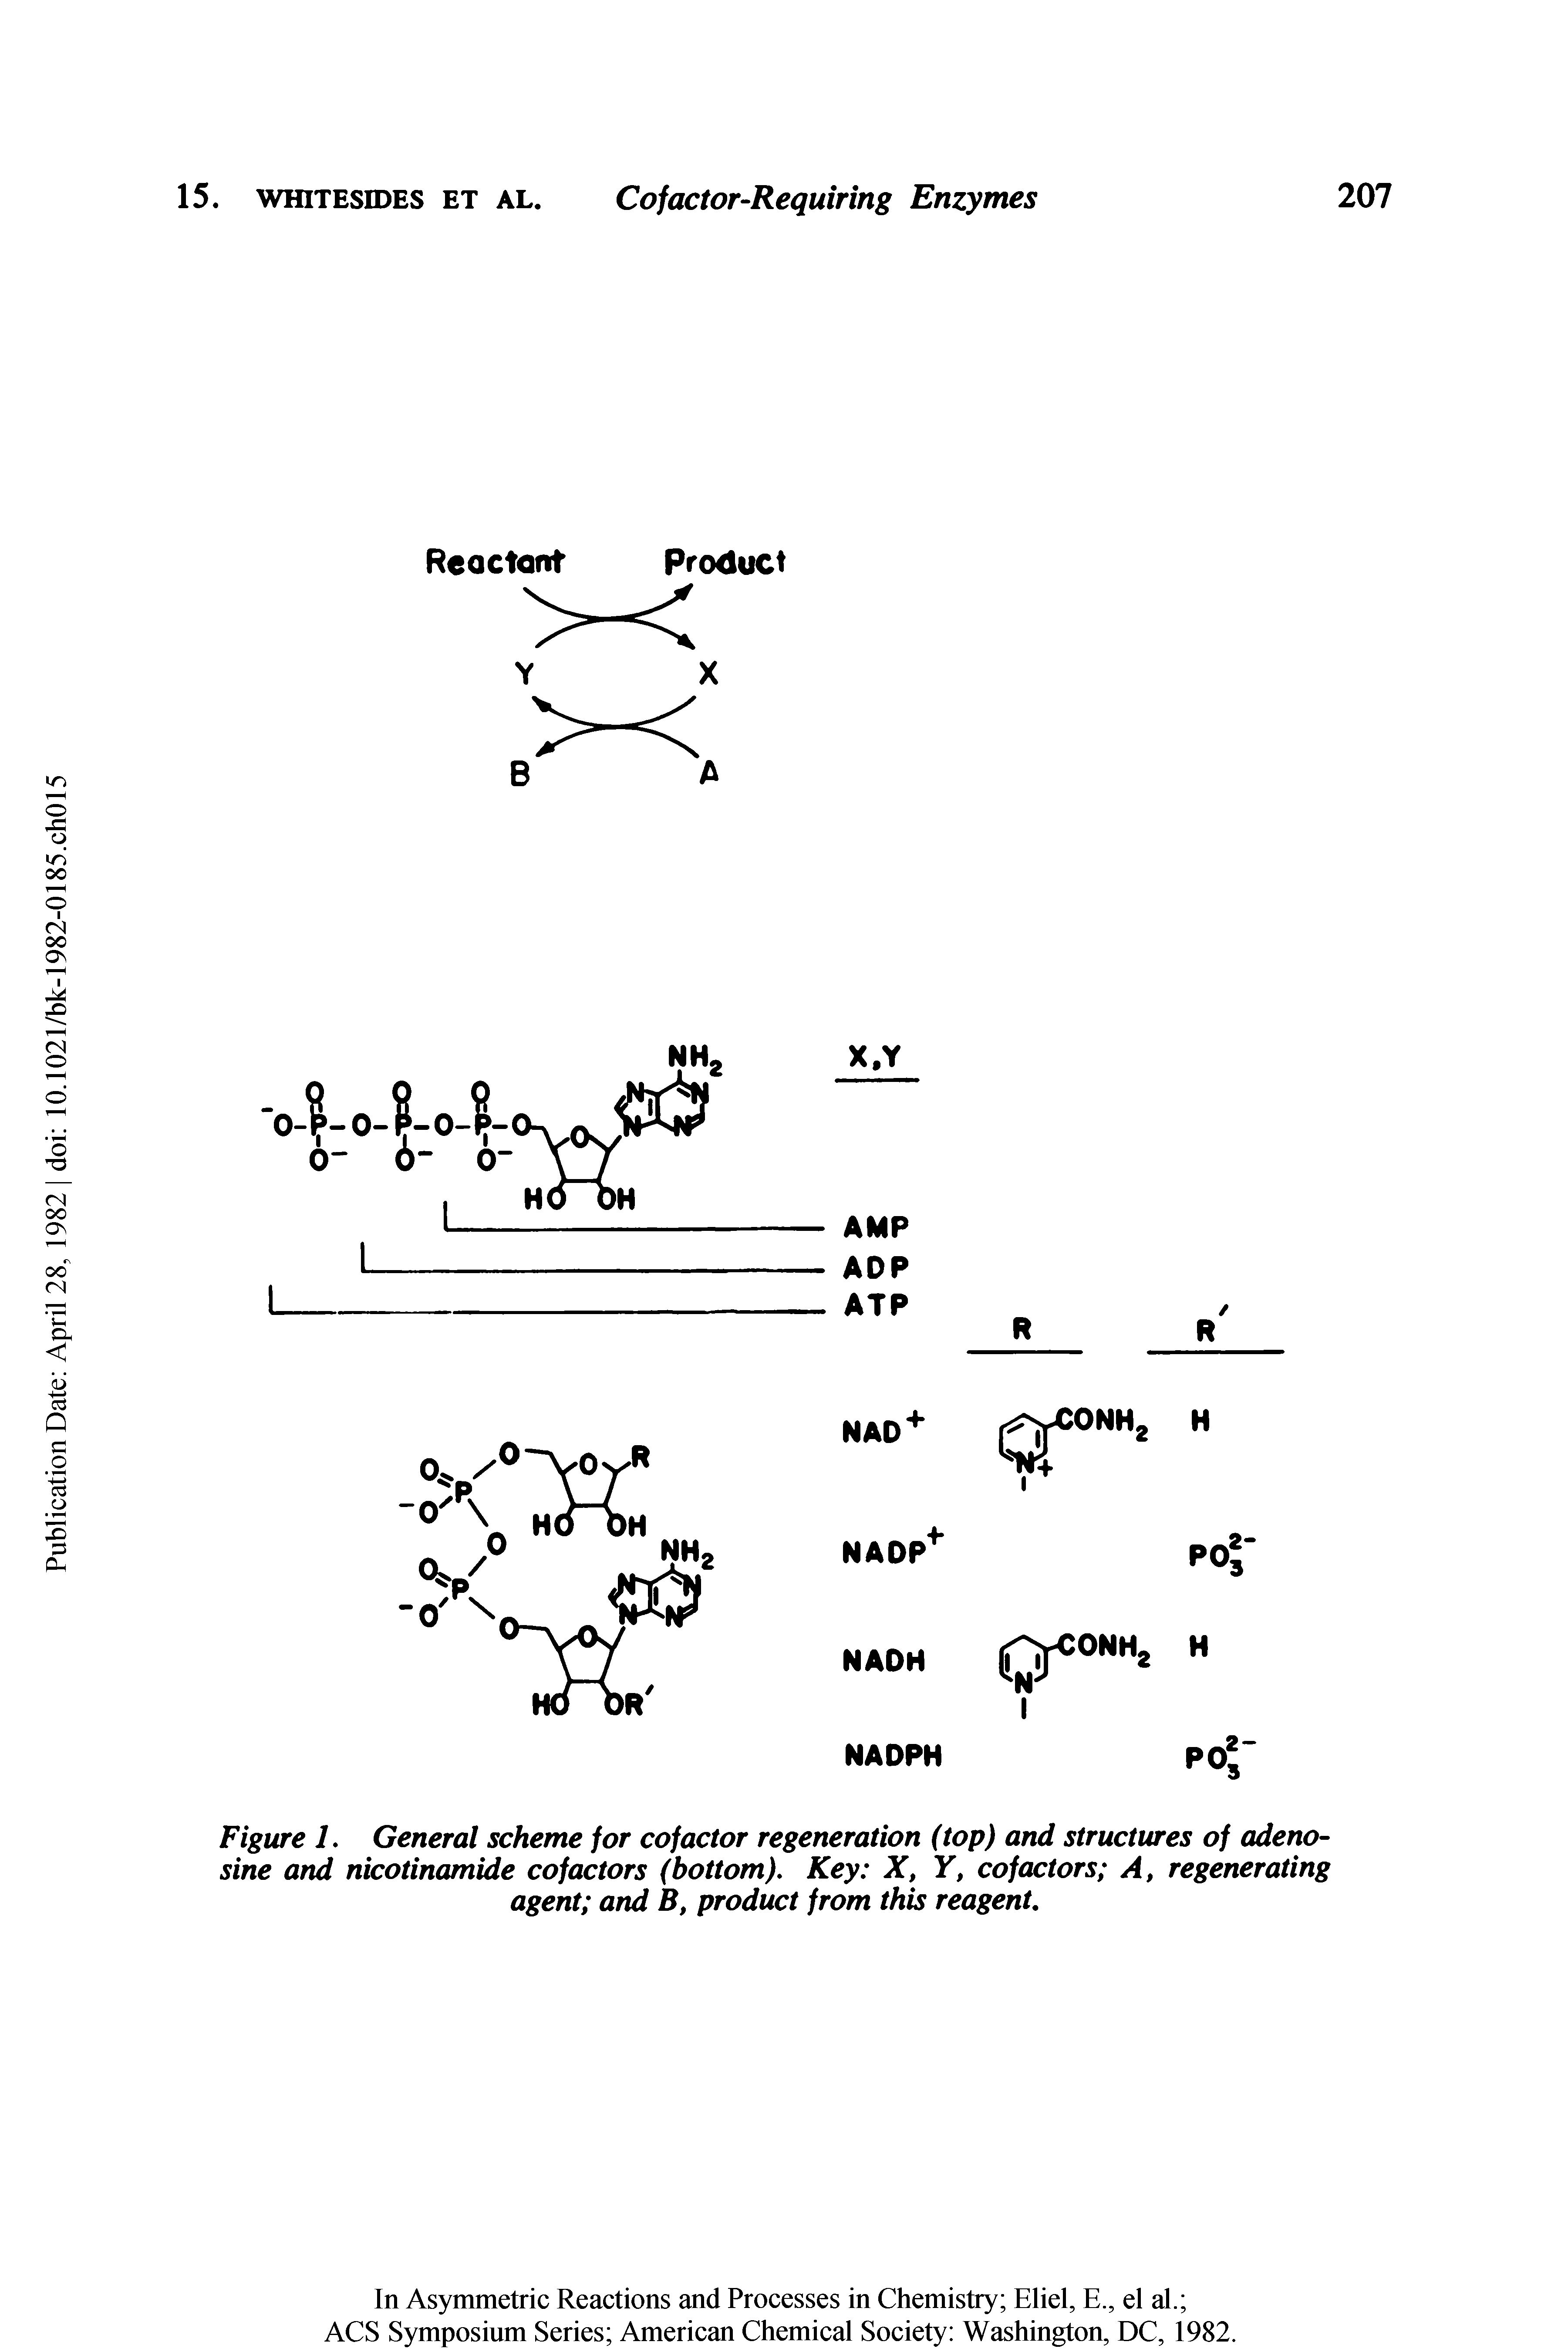 Figure 1. General scheme for cofactor regeneration (top) and structures of adenosine and nicotinamide cofactors (bottom). Key X, Y, cofactors A, regenerating agent and B, product from this reagent.